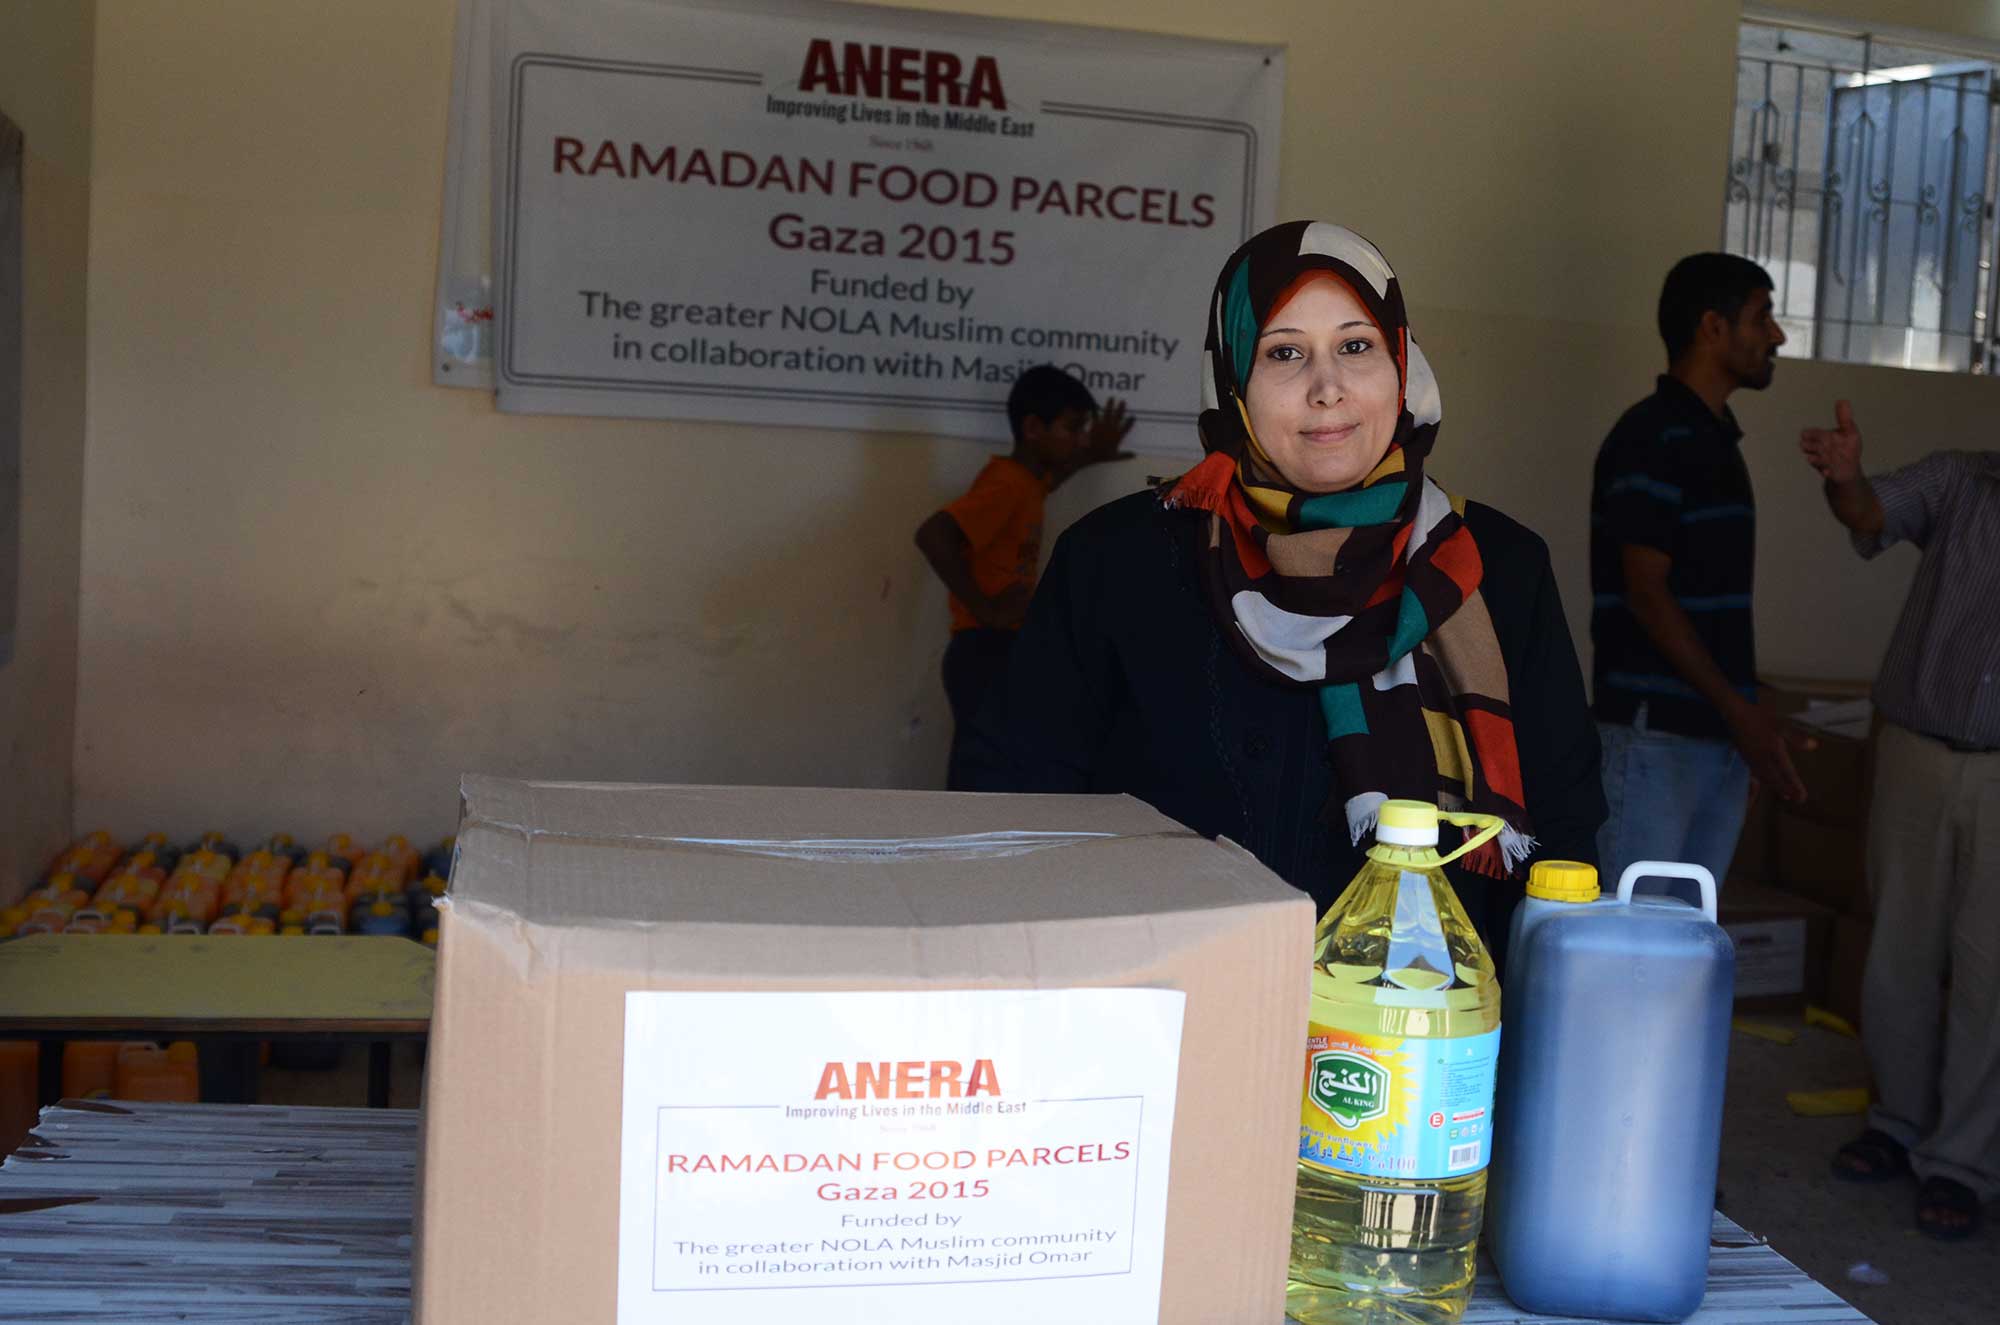 A mother stands with her food package, relieved that she can now provide meals for her family.